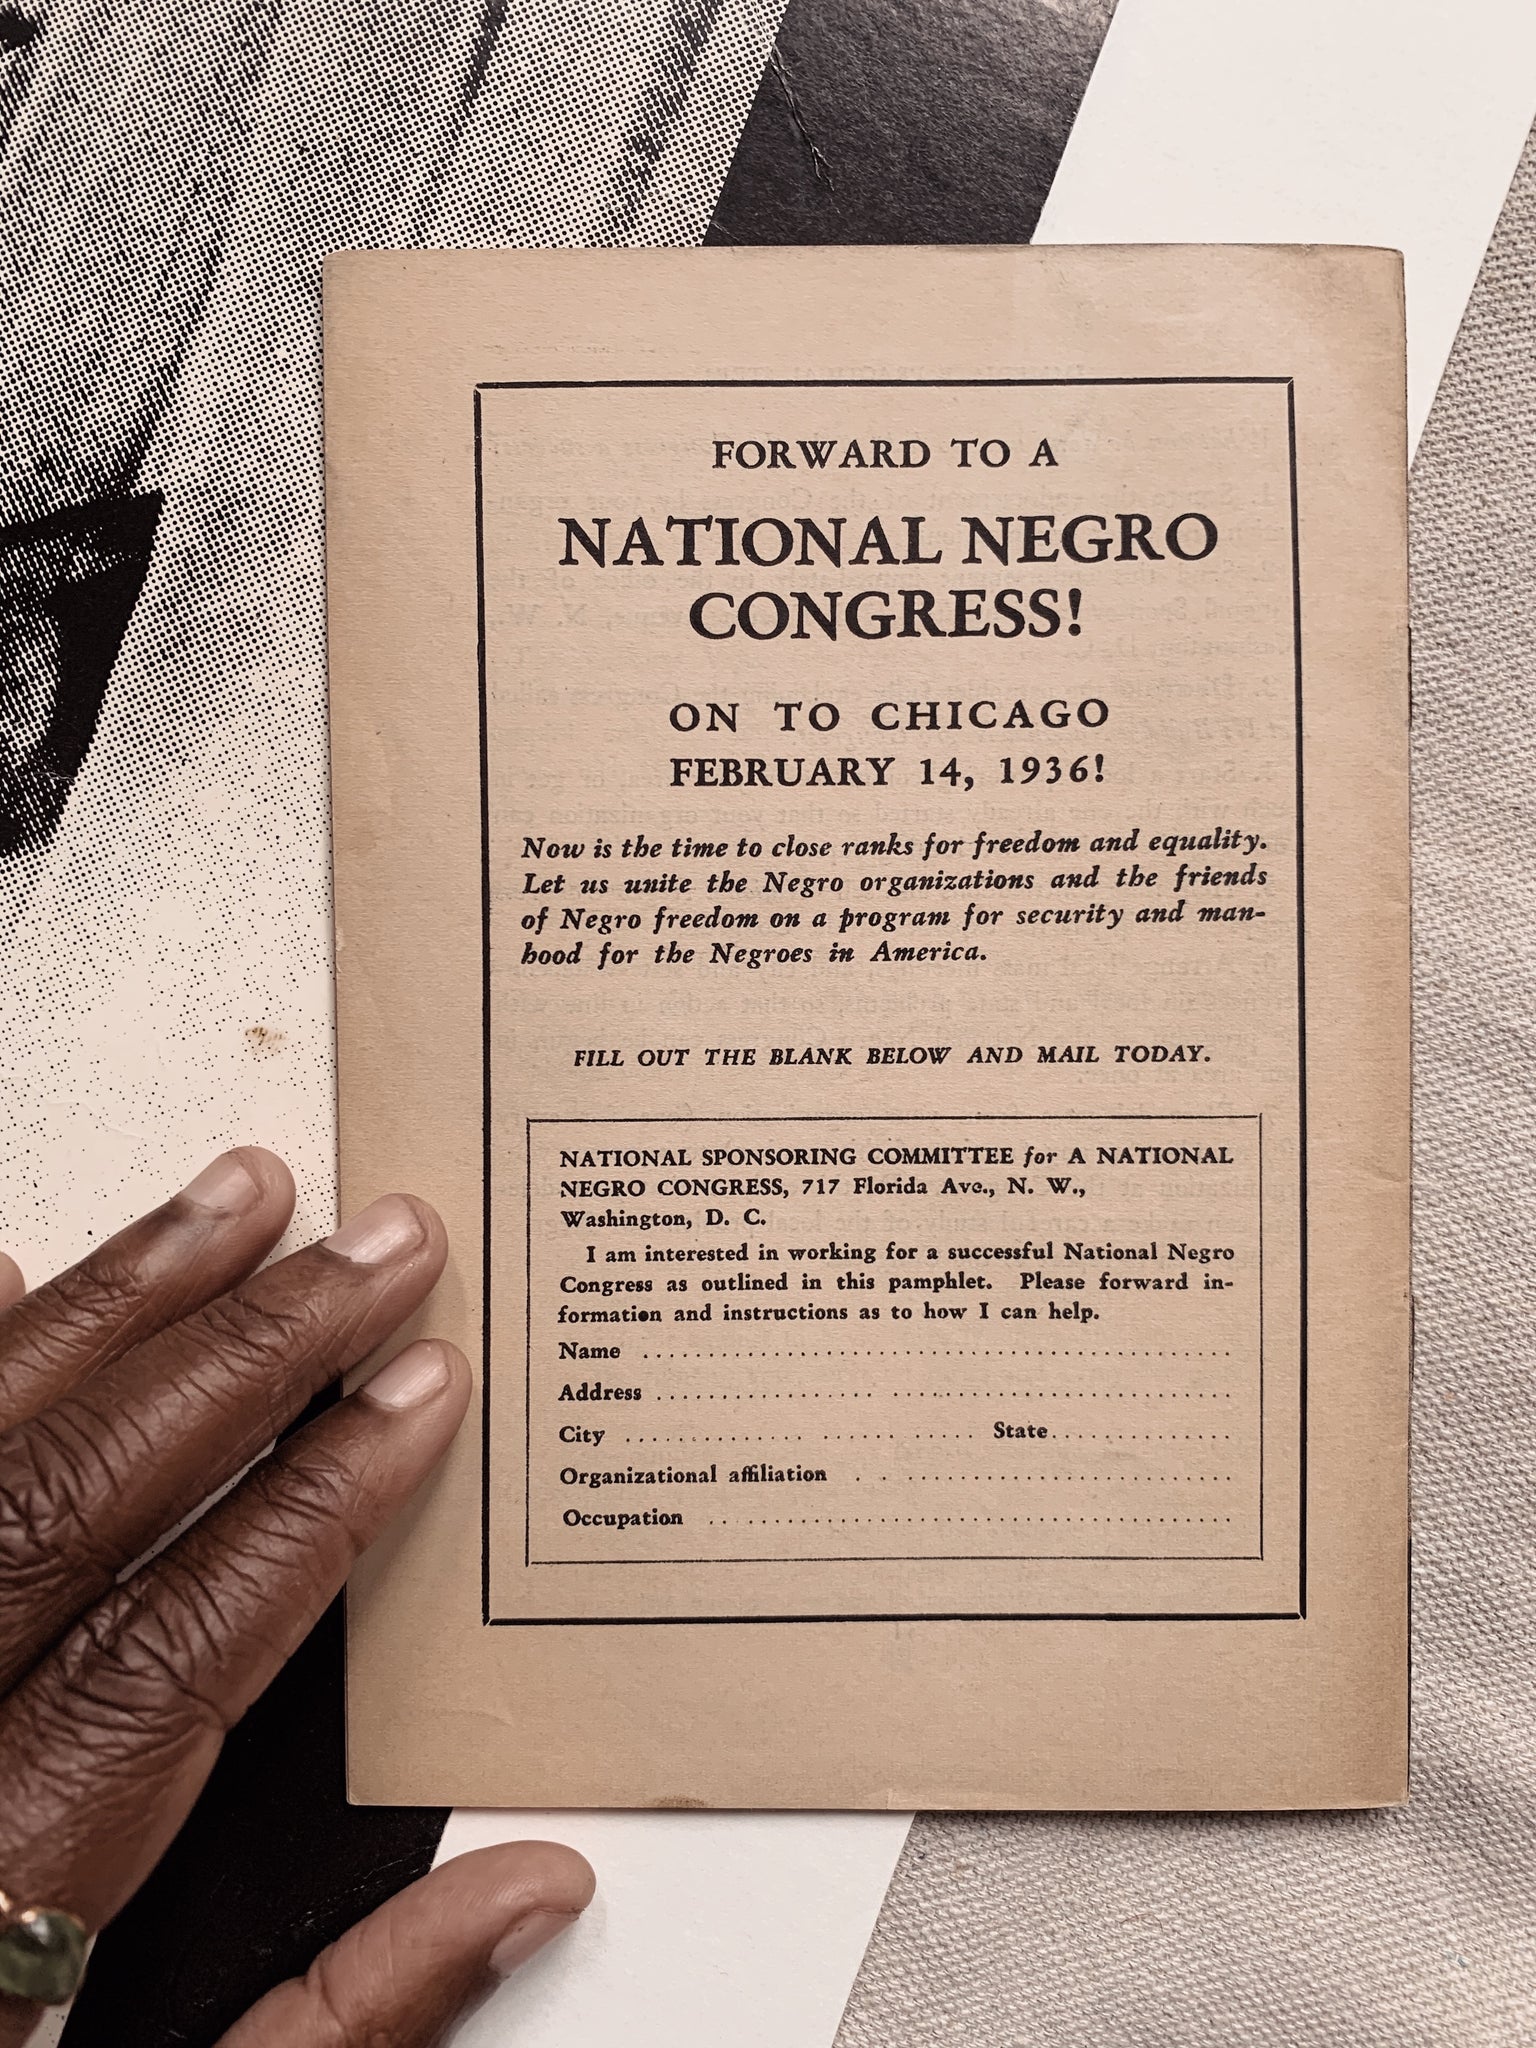 Vintage Softcover "Let Us Build A National Negro Congress" by John Davis (First Edition, 1935)